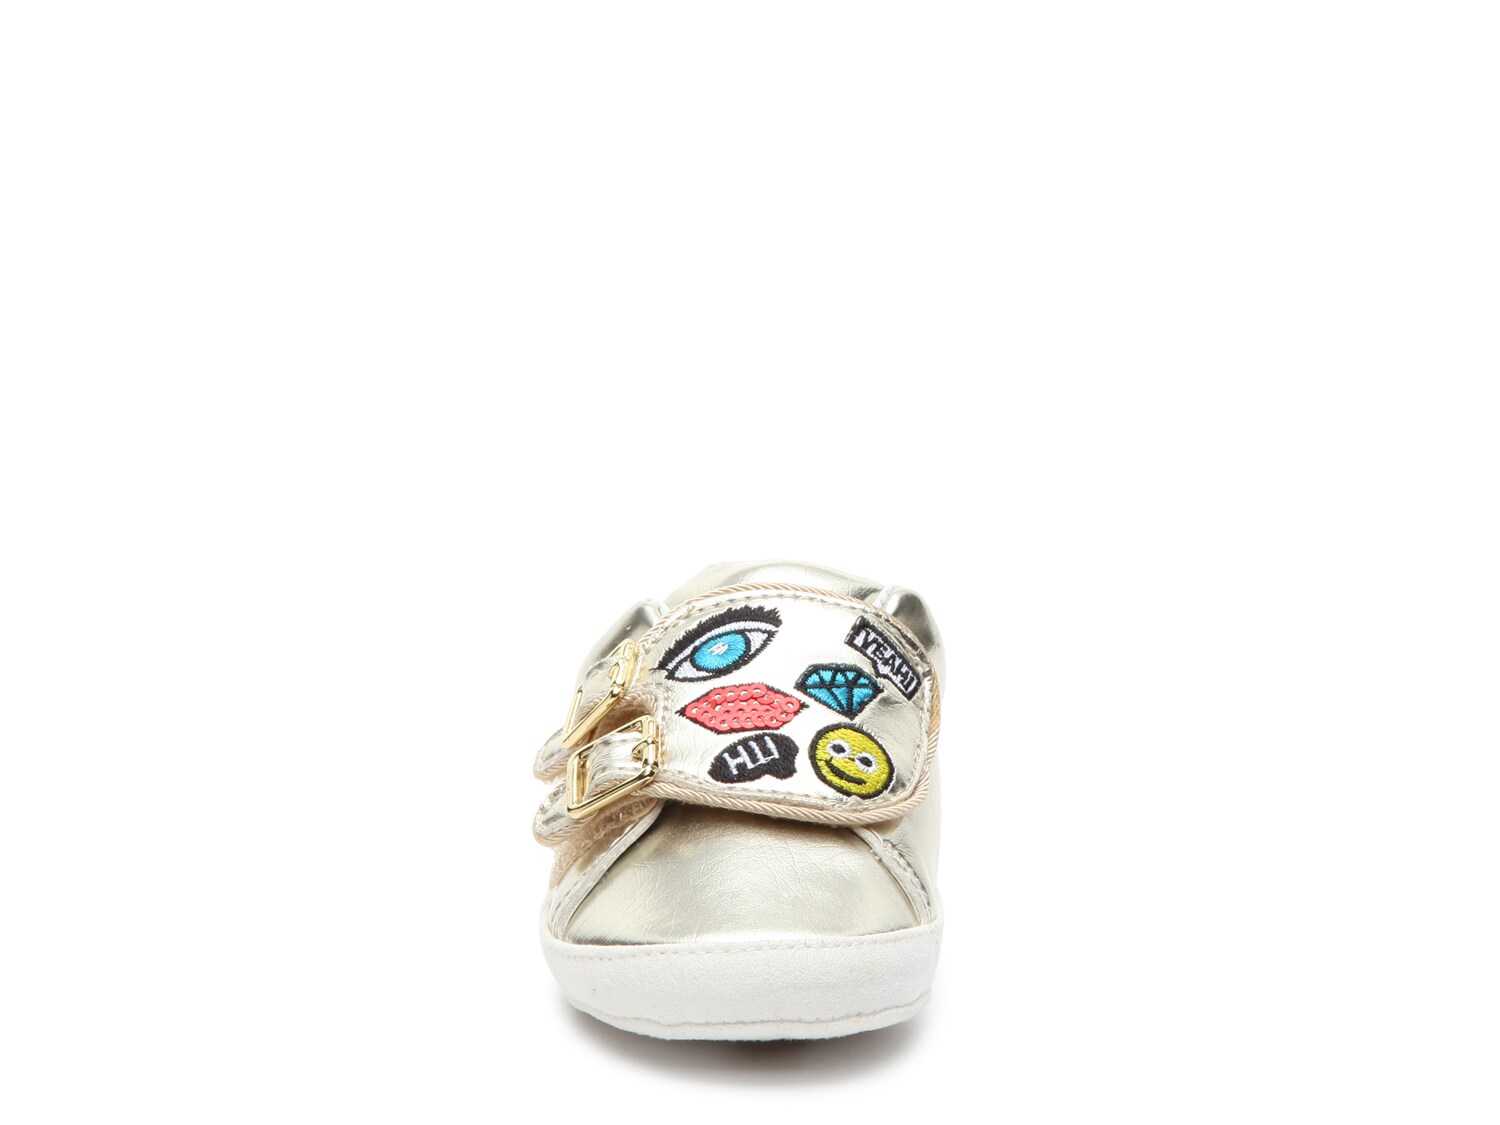 dsw baby shoes